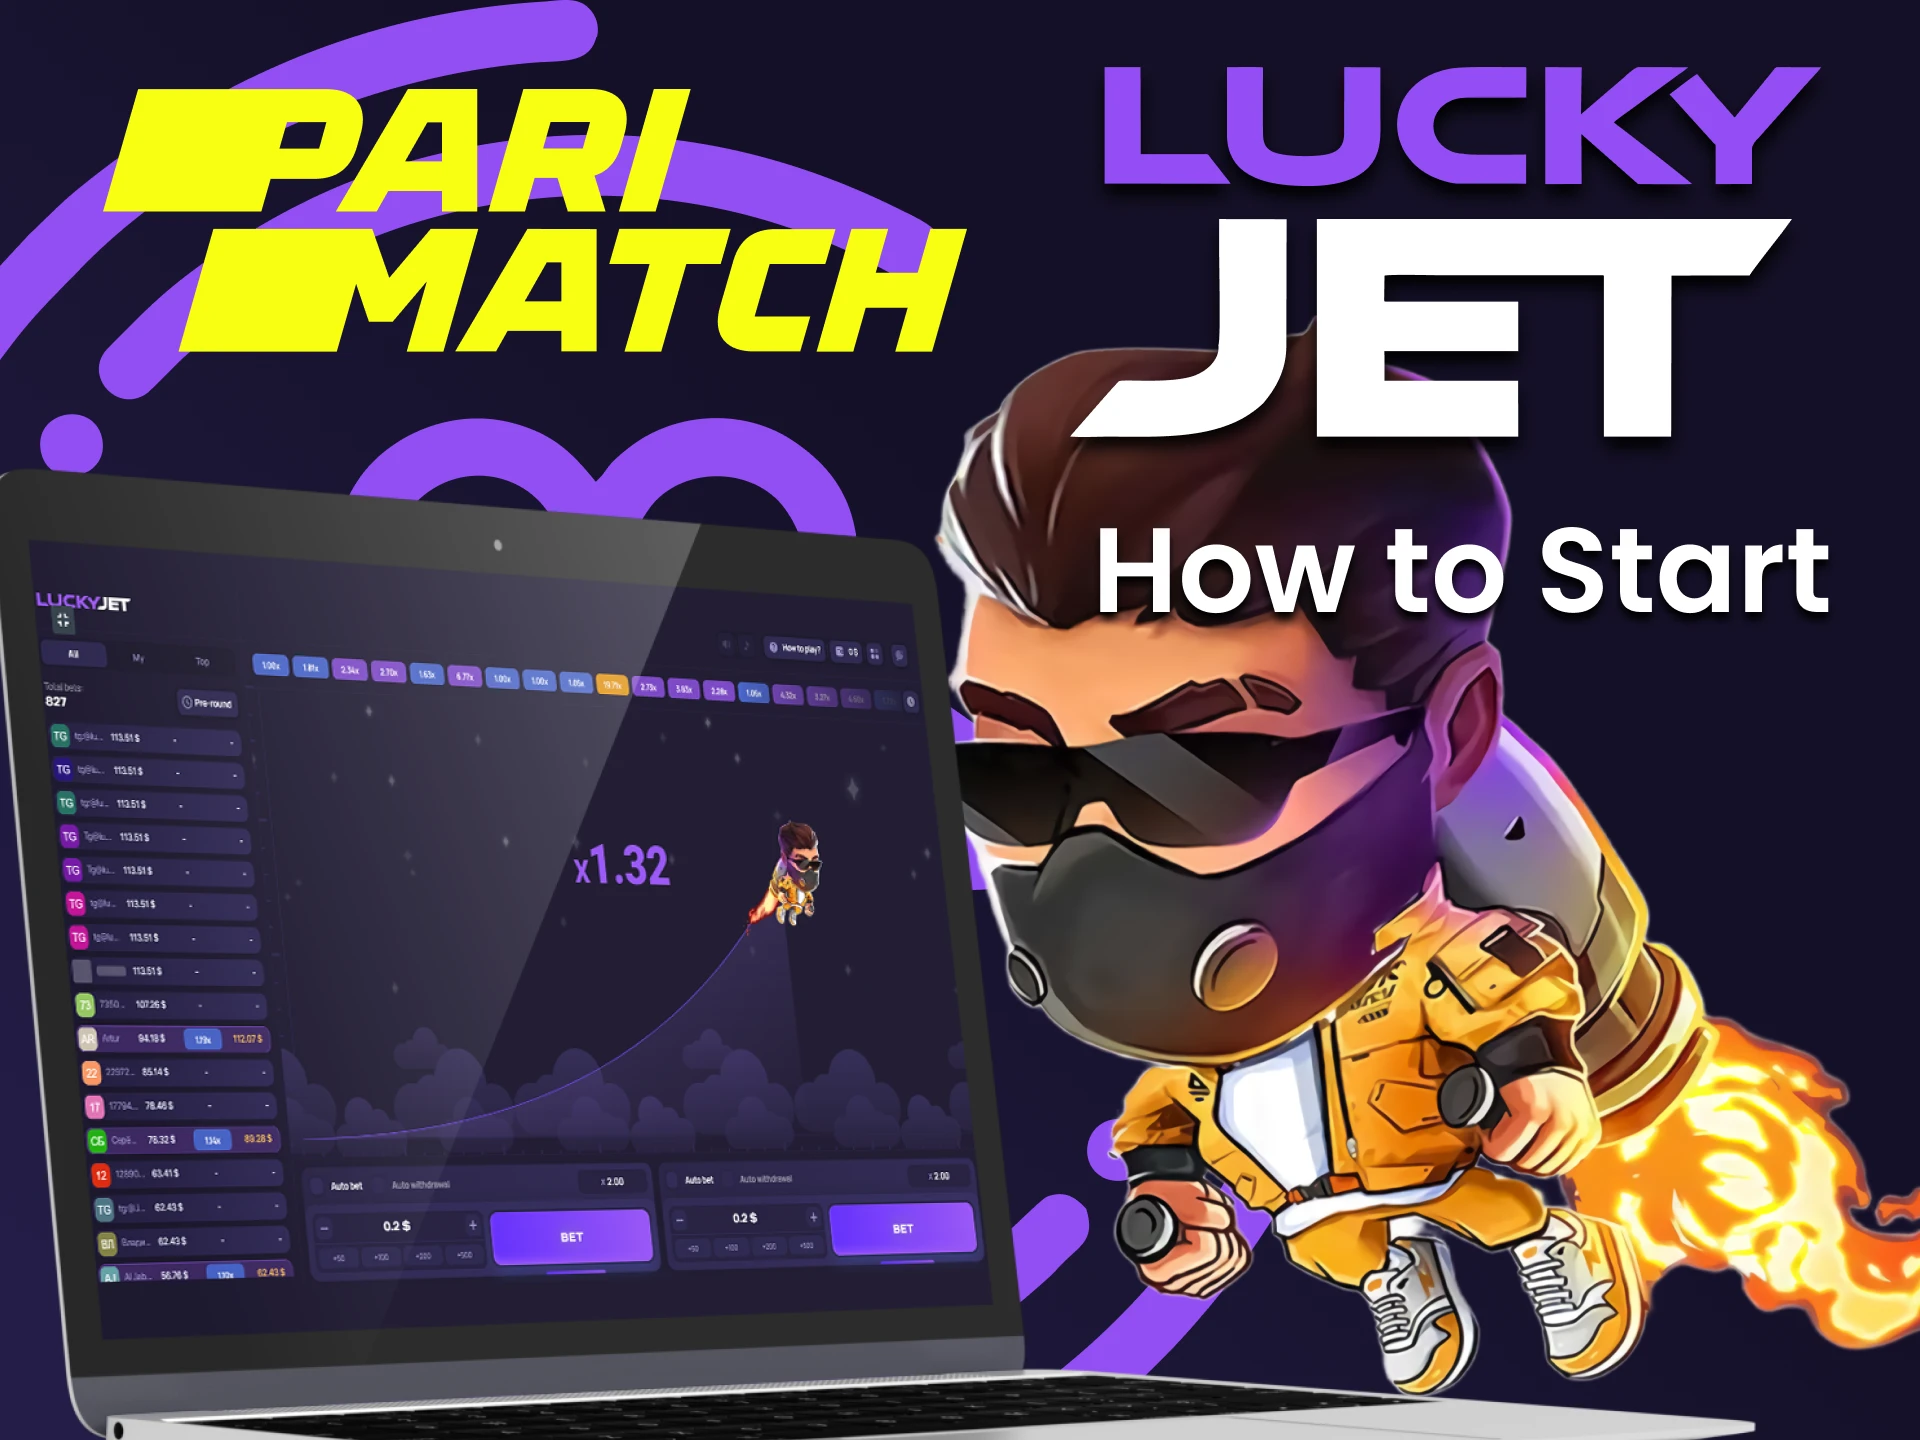 Go to the desired Parimatch section and start playing Lucky Jet.